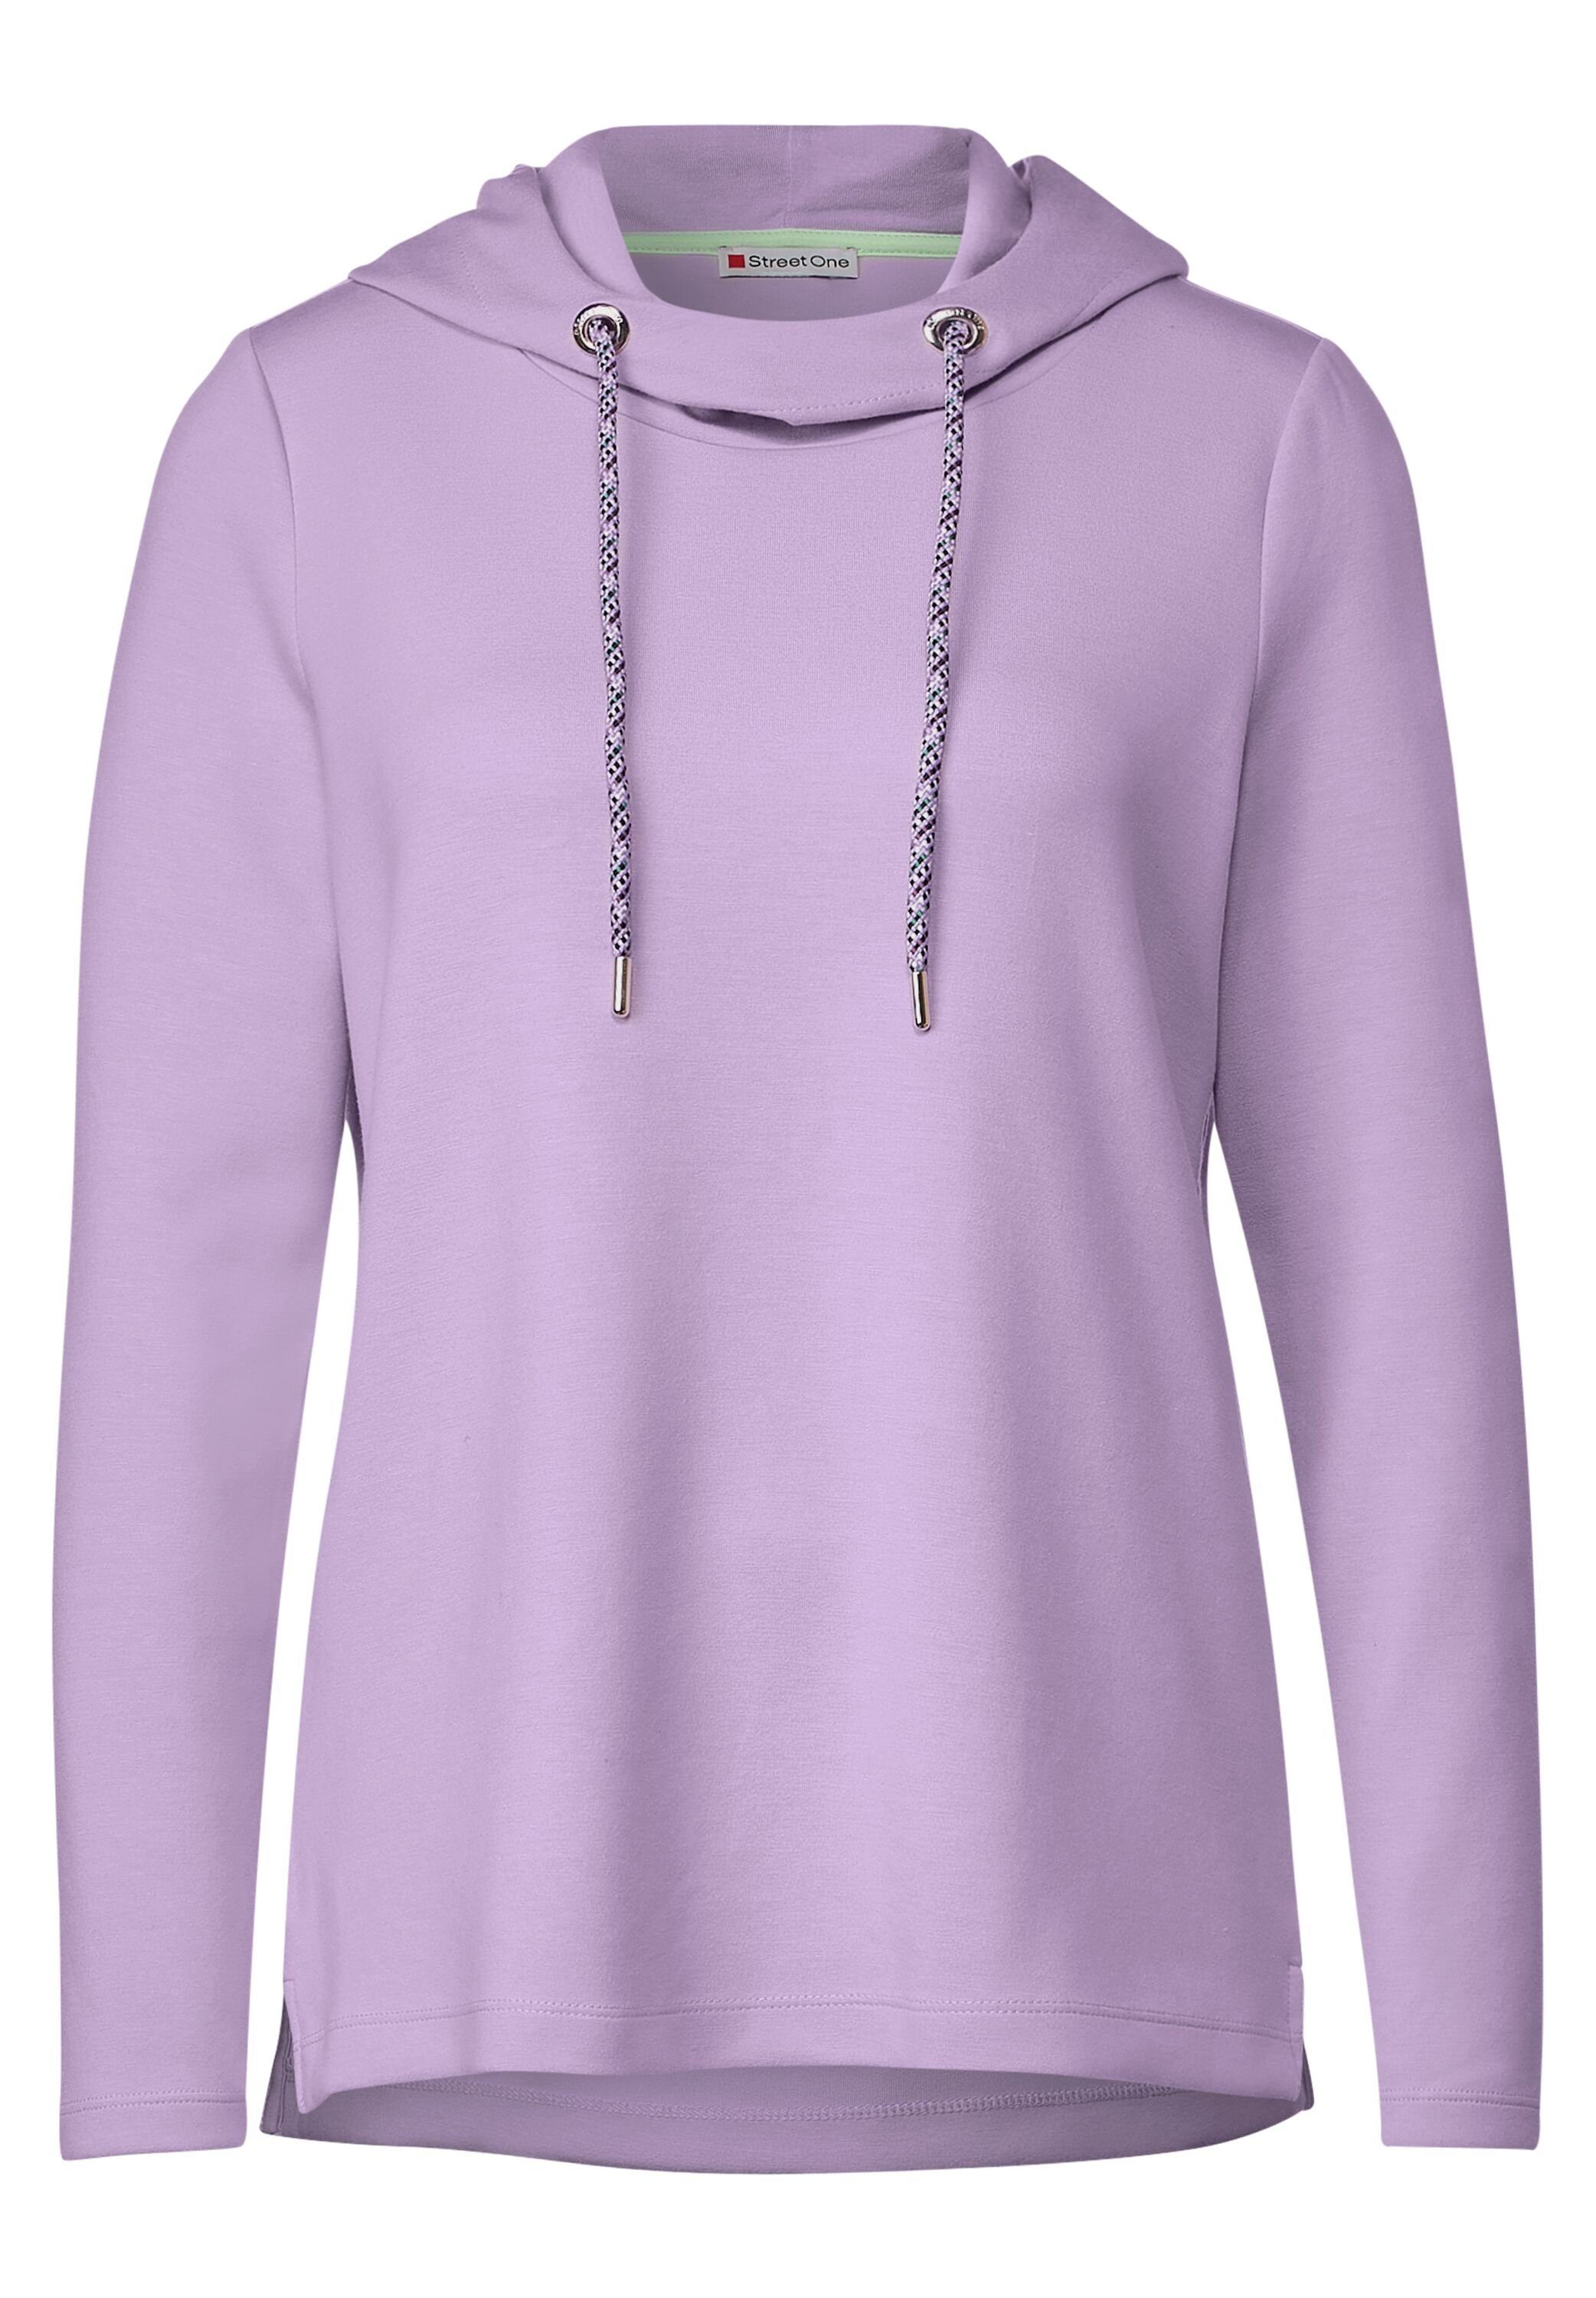 STREET pure soft lilac ONE Strickpullover